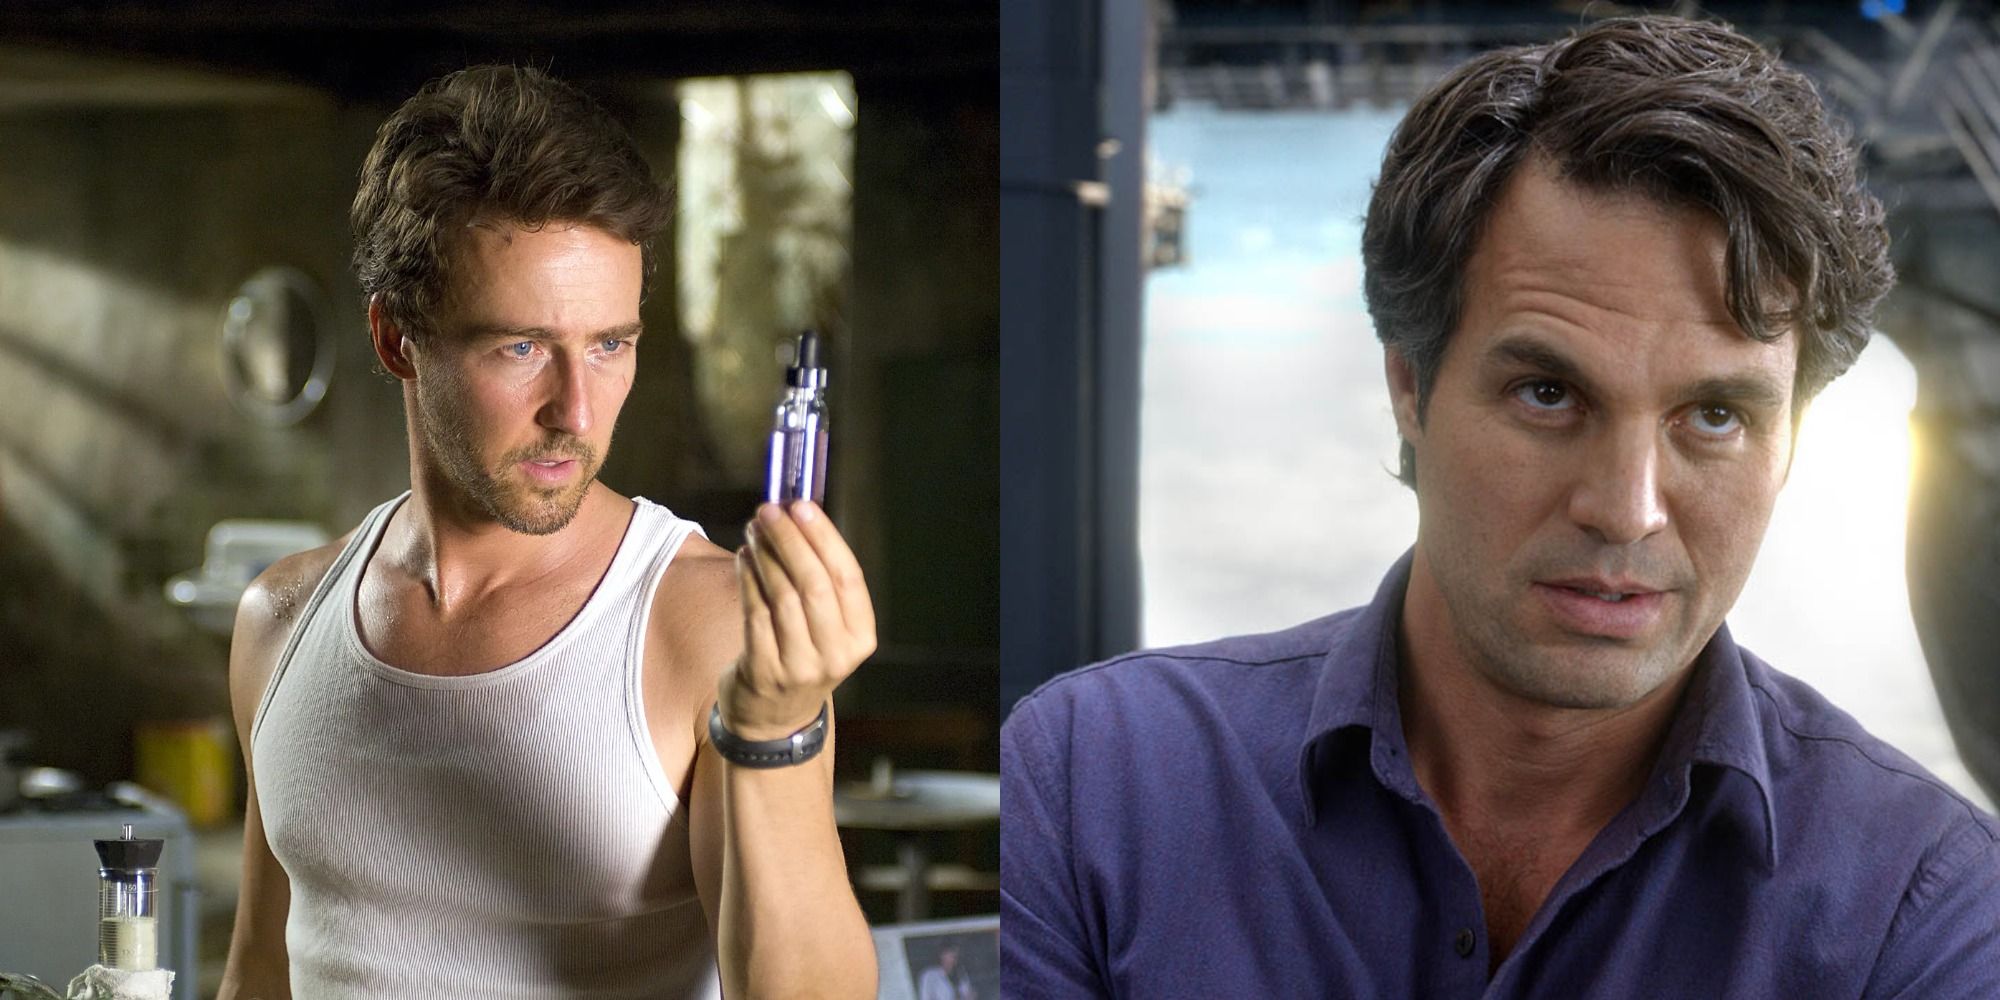 side by side images of Edward Norton and Mark Ruffalo as Bruce Banner/Hulk in the MCU